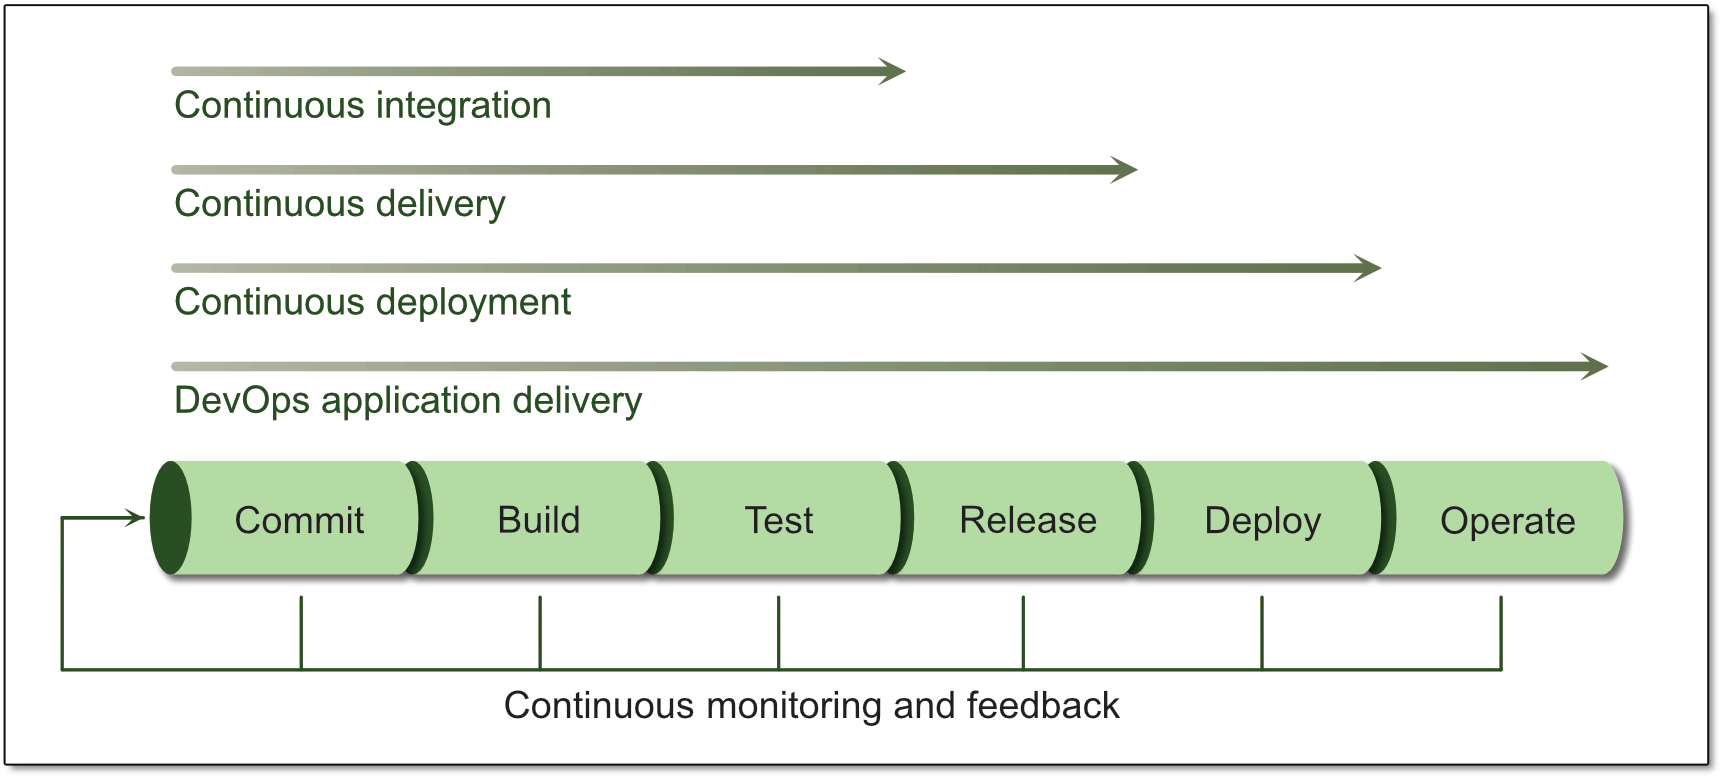 DevOps and the application delivery pipeline monitoring and feedback